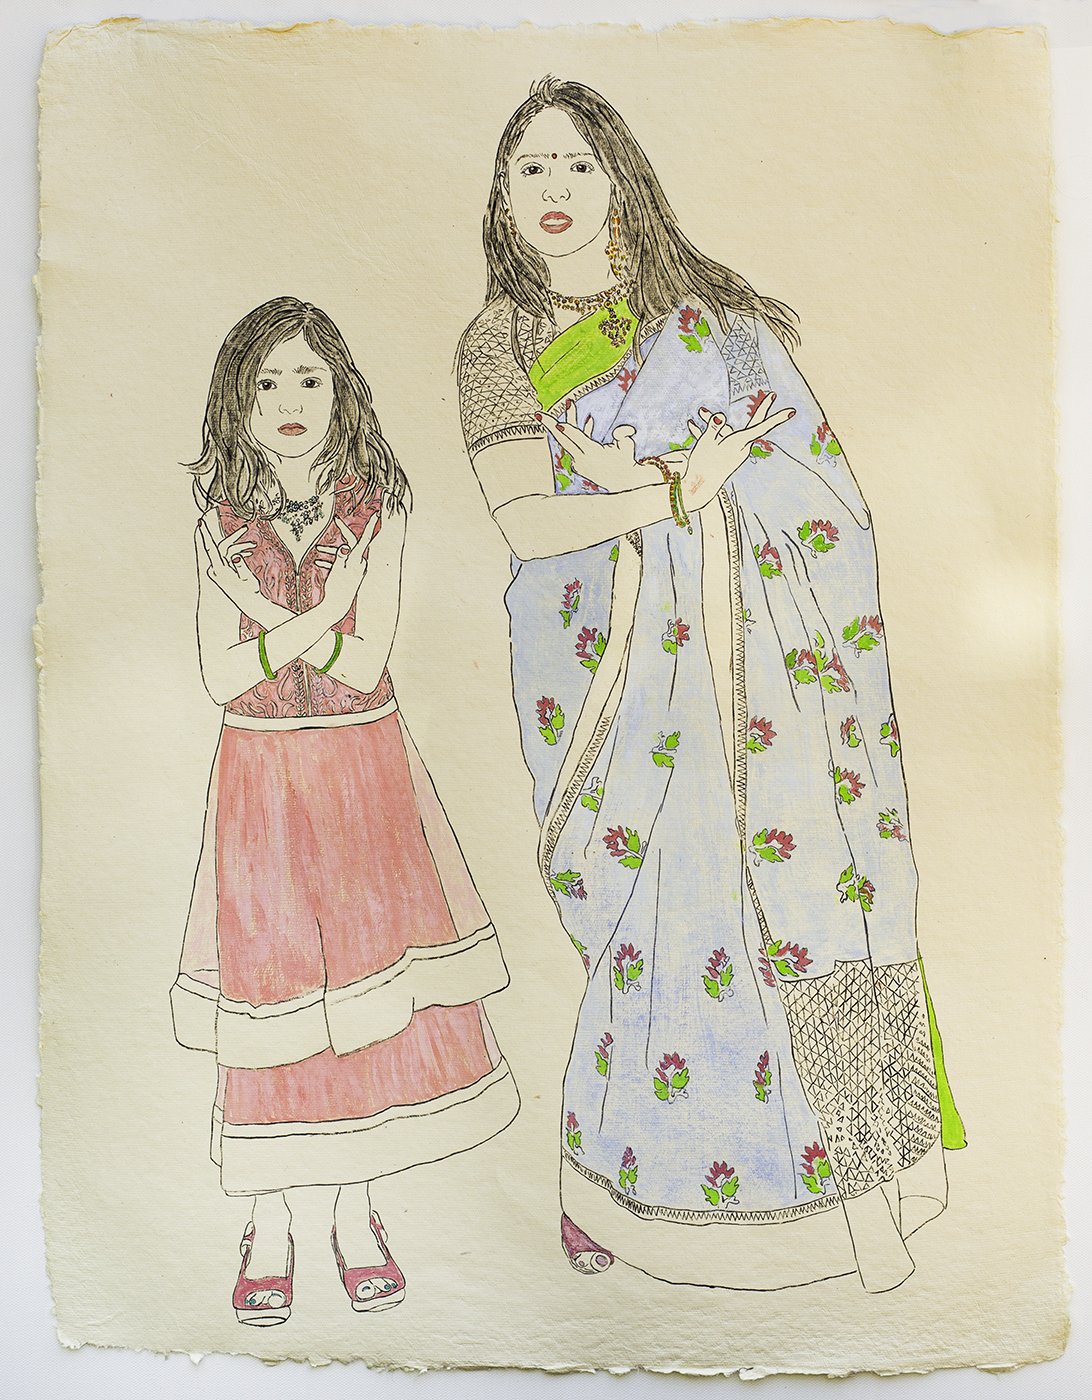   Available    Mother and Daughter, Members of an Indian Dance Troupe in the Seattle Area   25” x 19”, gouache, watercolor, India Ink on paper, 2021 